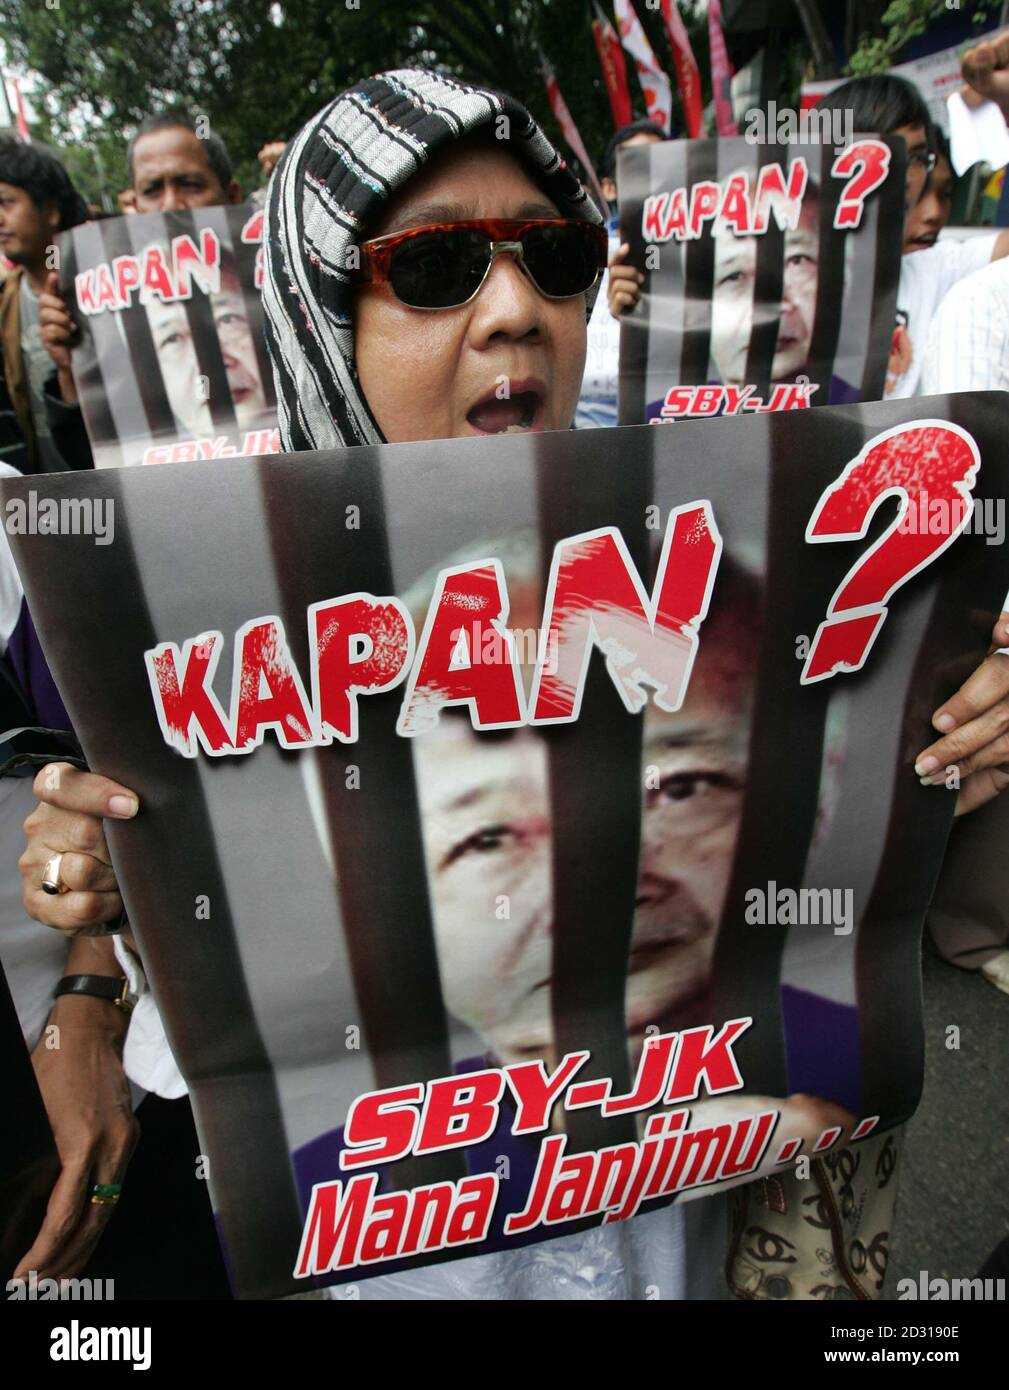 Activists Hold Posters Of Former President Suharto During A Rally Outside Pertamina Hospital Where Suharto Is Undergoing Treatment In Jakarta January 19 2008 The Protesters Demanded That Suharto Be Brought To Justice